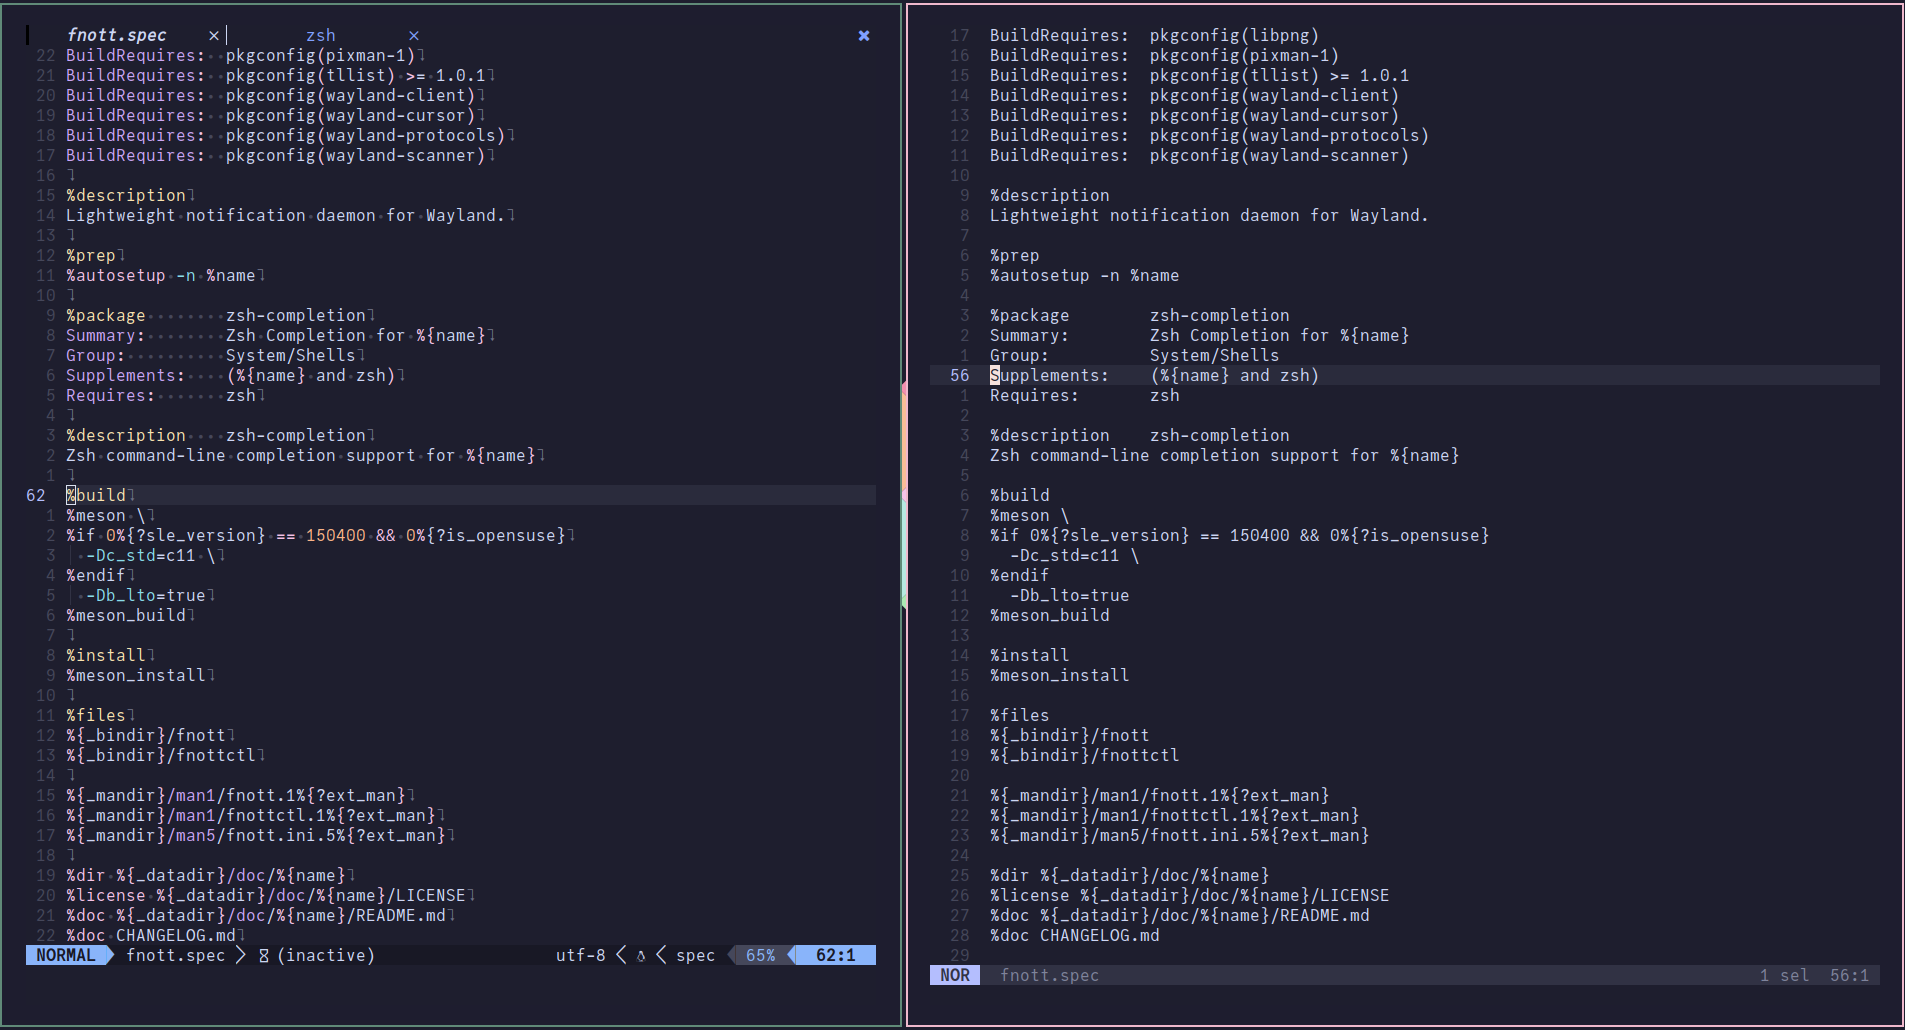 comparing helix and neovim syntax highlighting of rpm